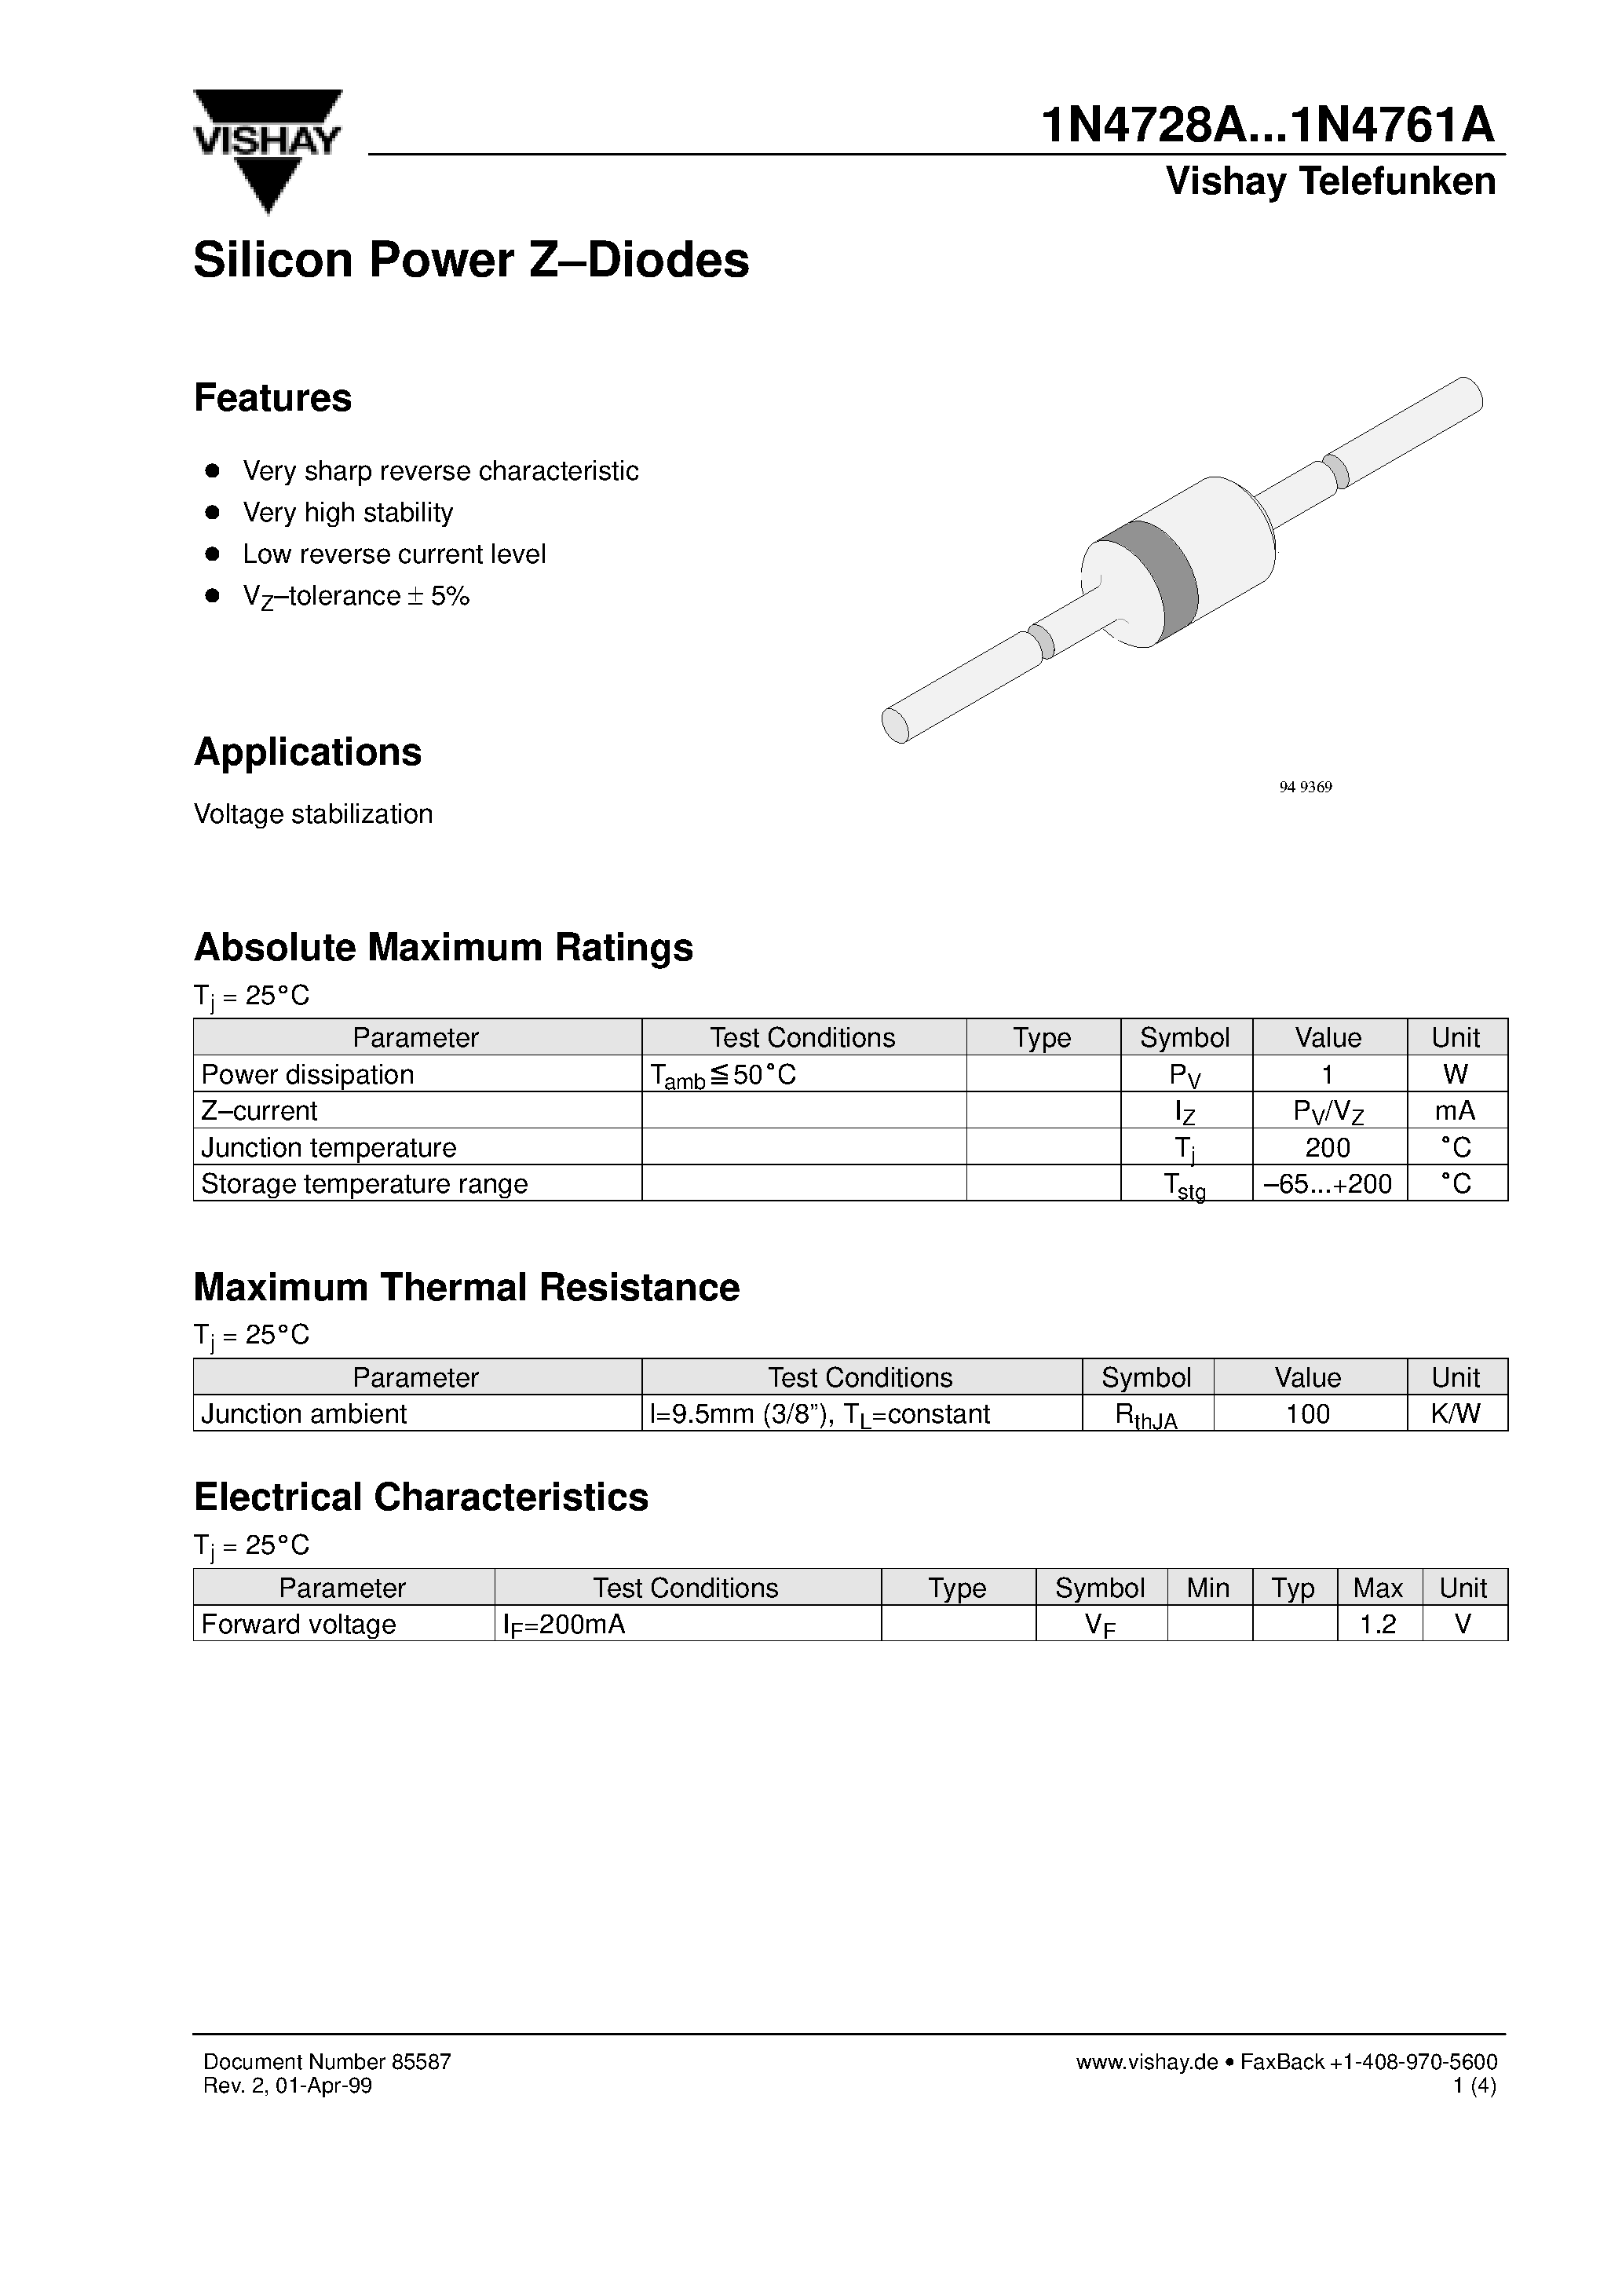 Даташит 1N4749A - Silicon Power Z-Diodes страница 1